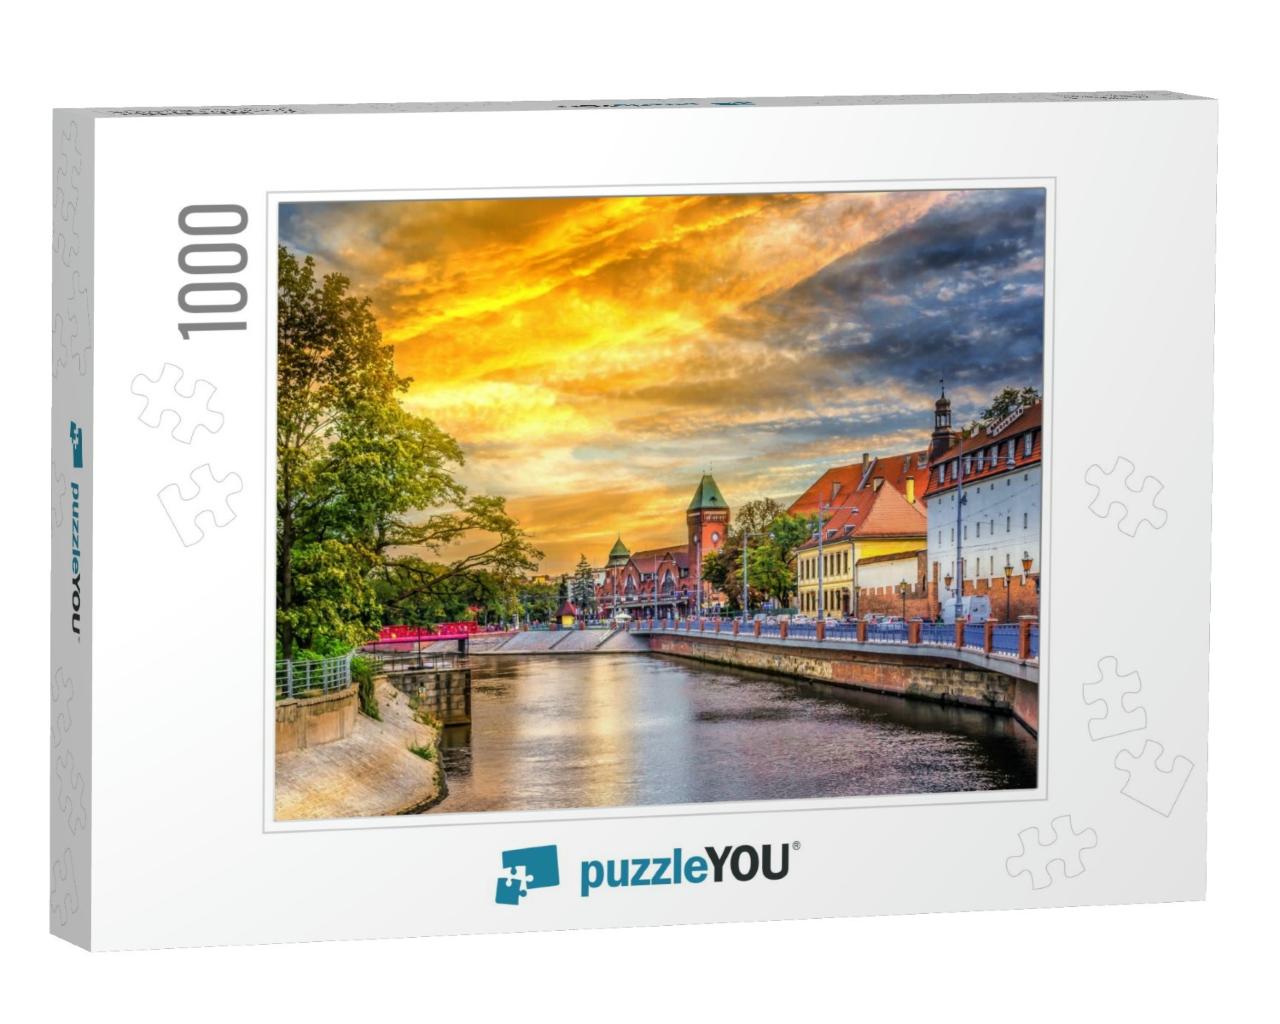 City of Wroclaw in a Sunny Summer, Poland... Jigsaw Puzzle with 1000 pieces